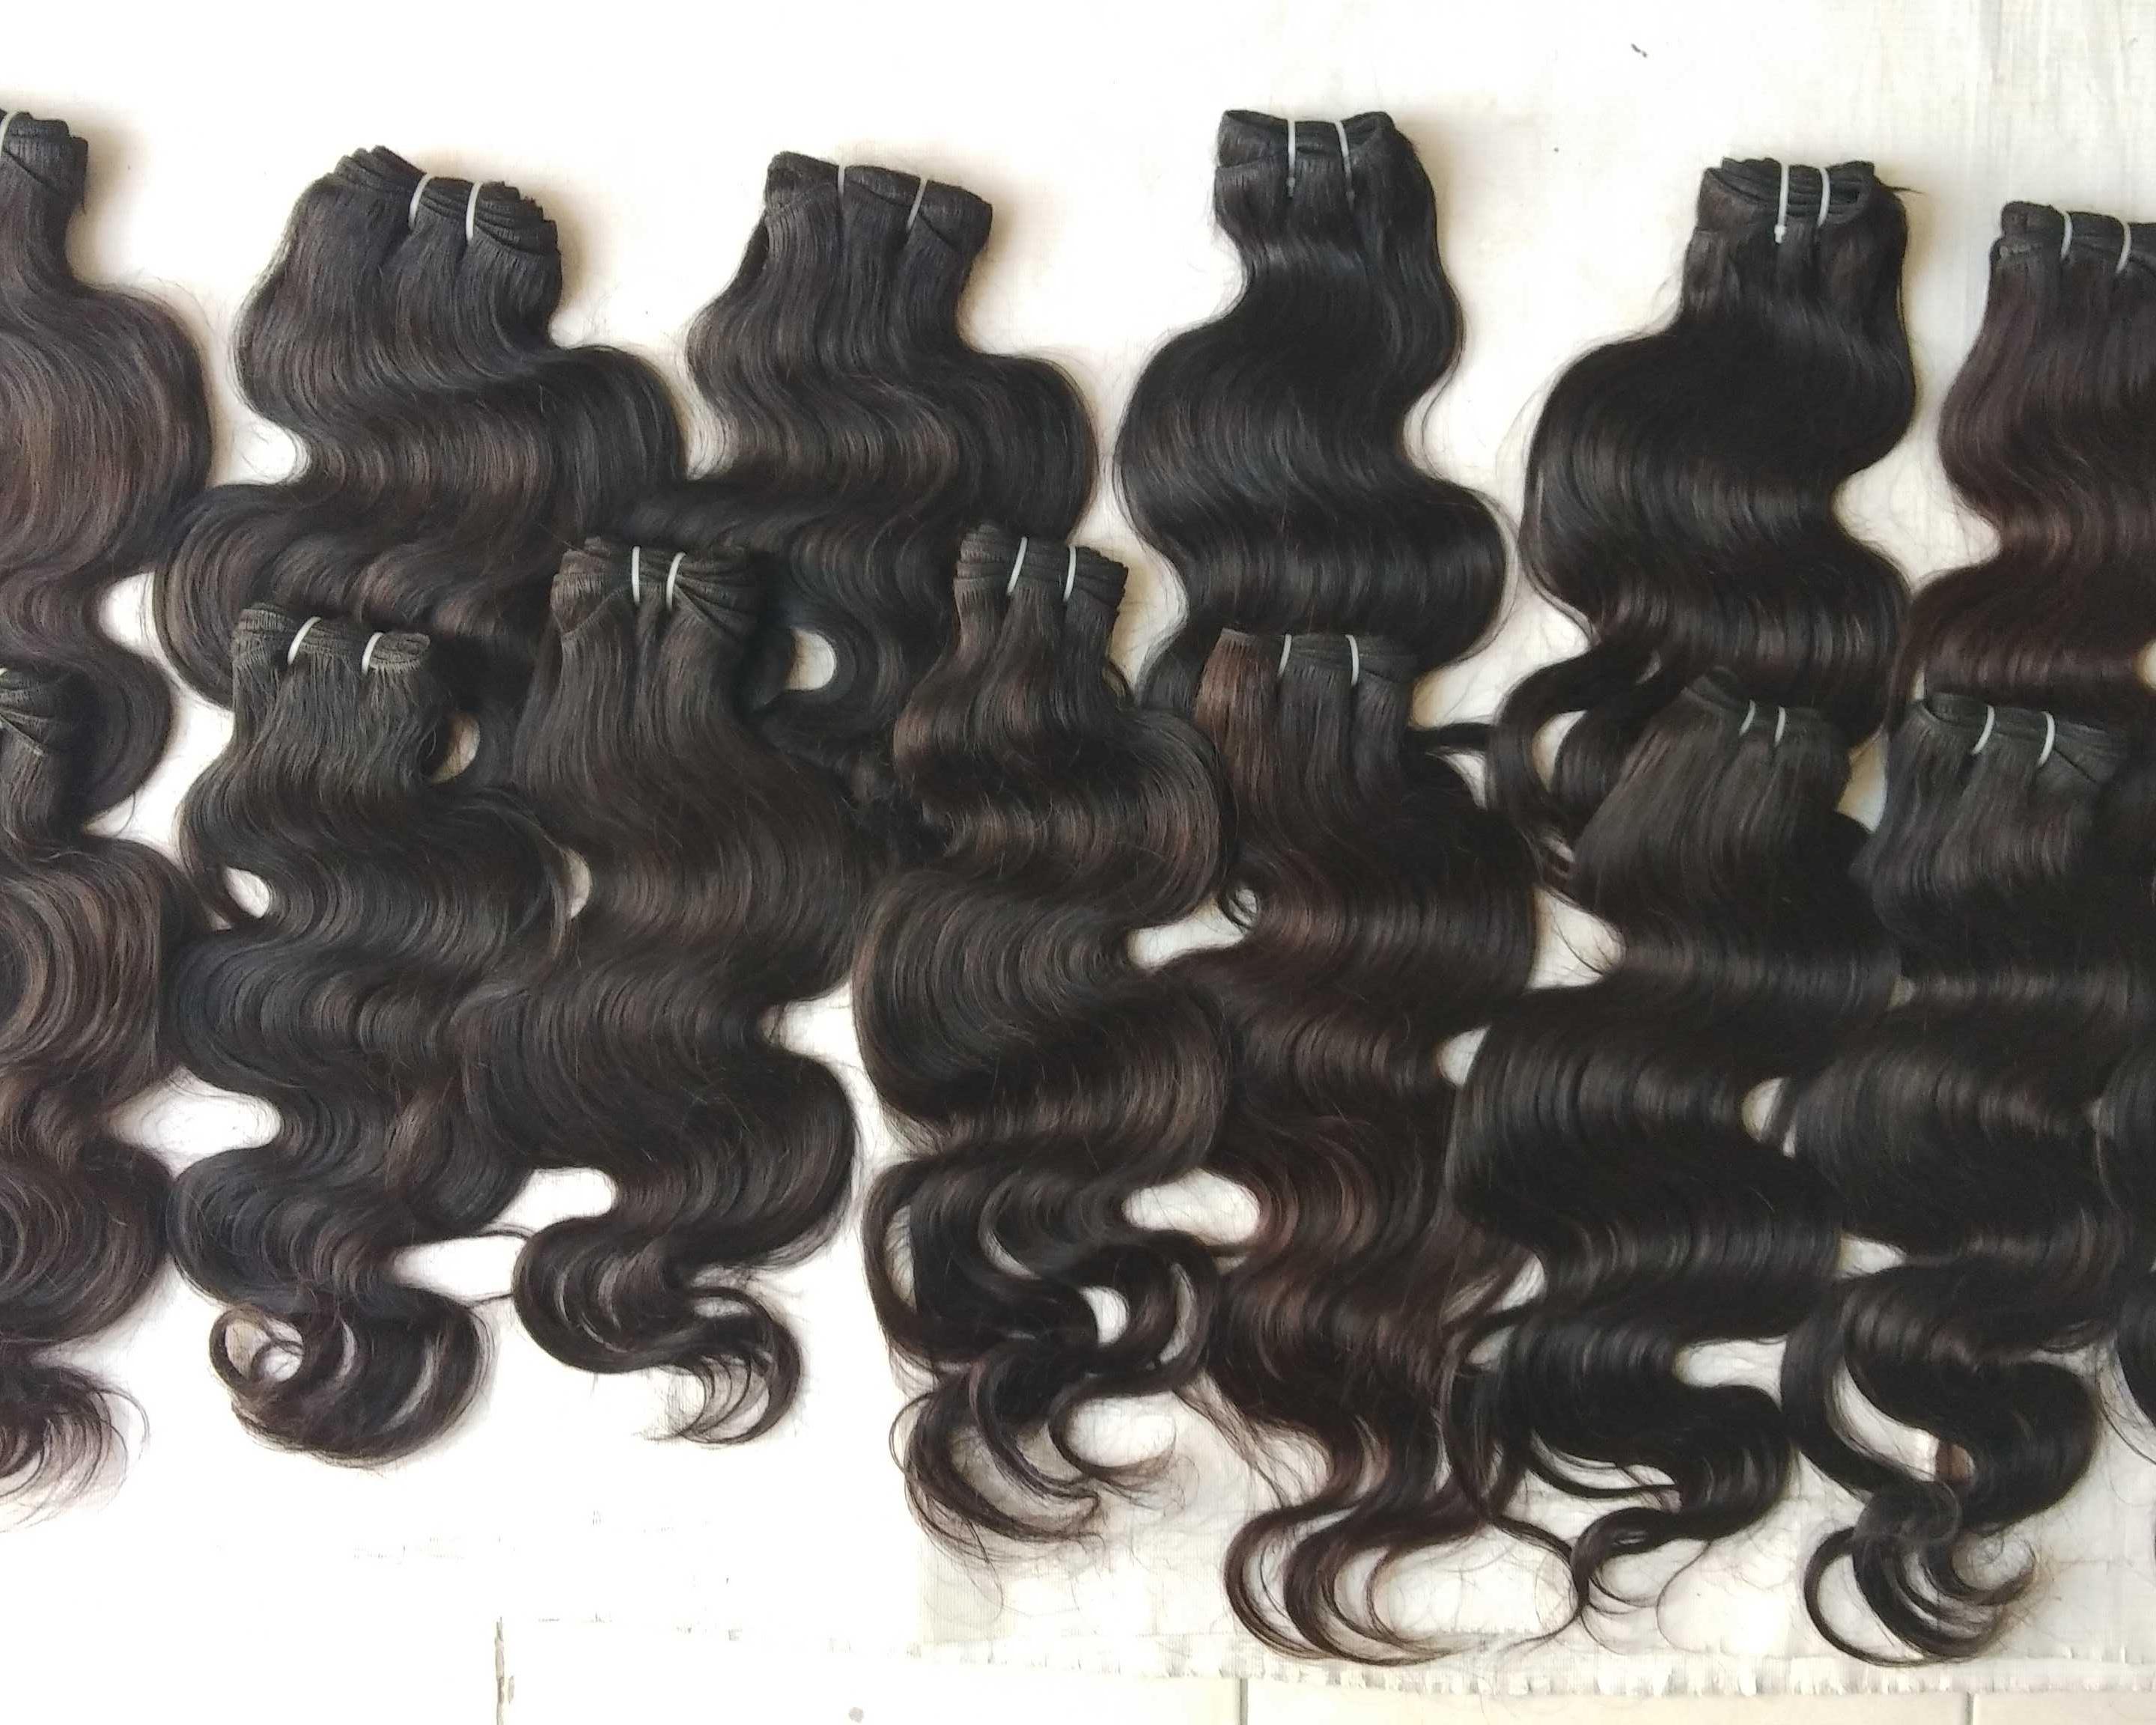 Processed Body Wave Hair Double Machine Weft